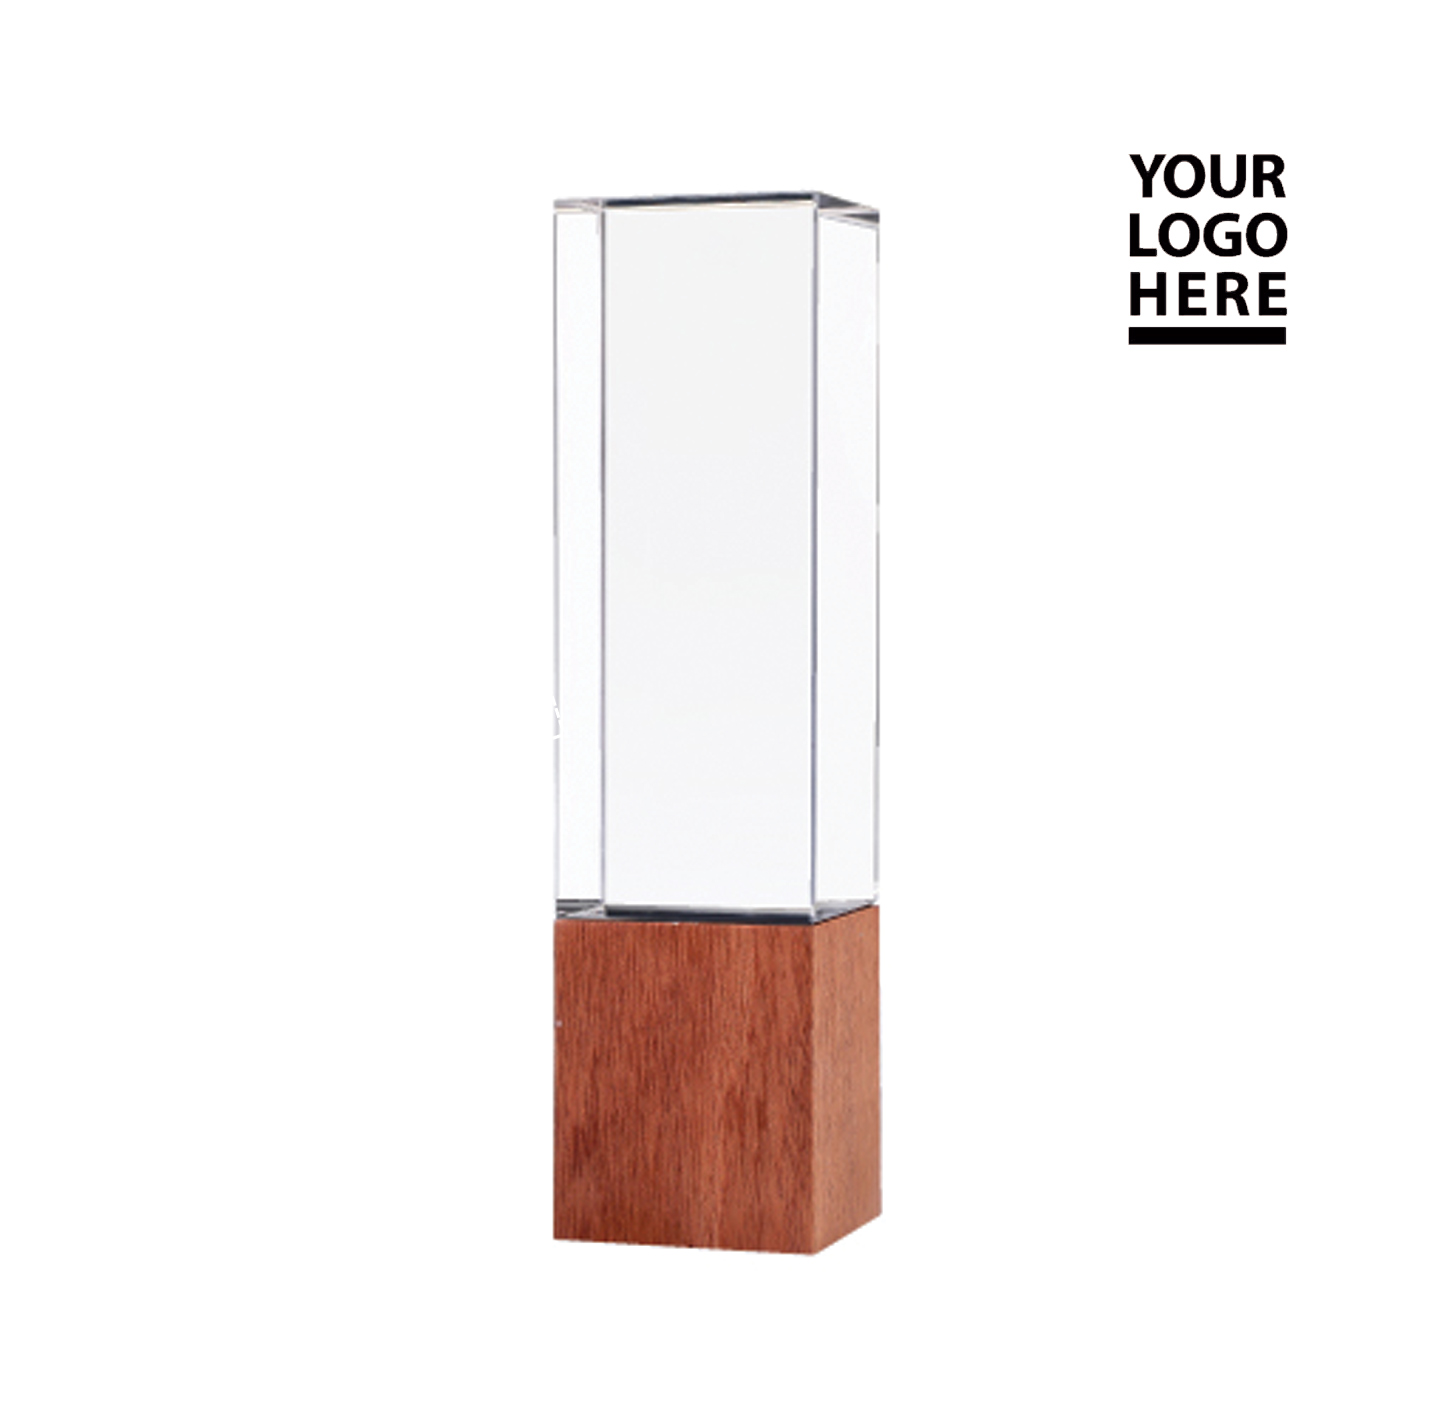 Cuboid Shape Crystal Awards with Wooden Base